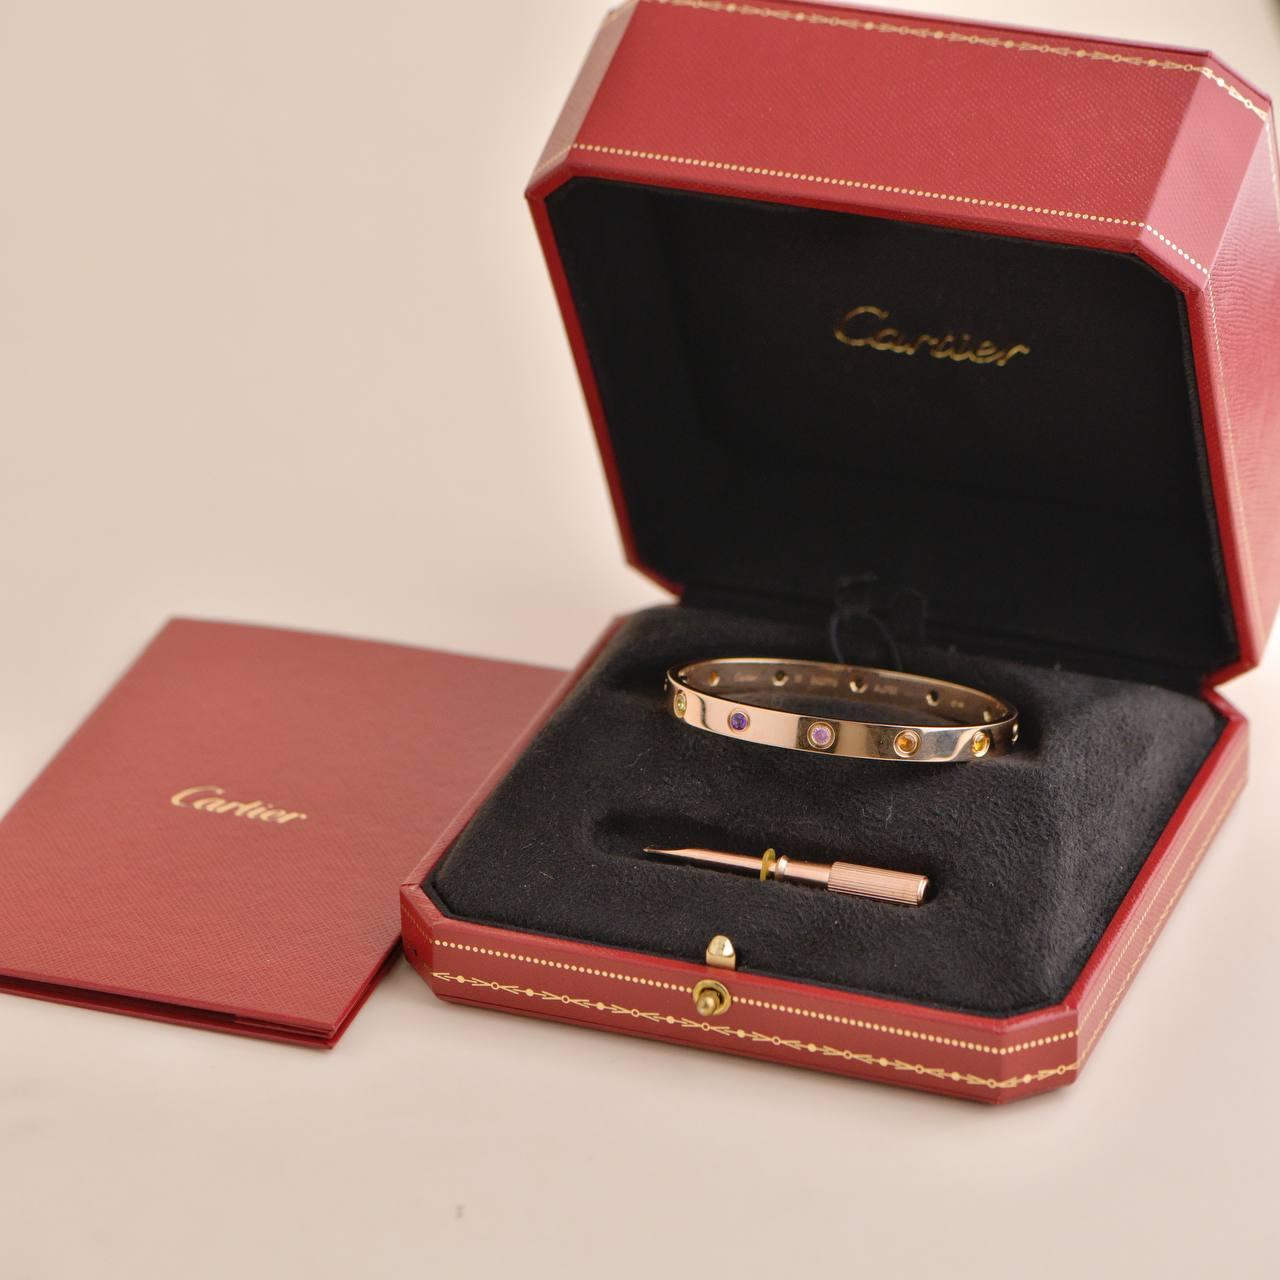 SKU	AT-2398
Comes With	Full Set (Box + Card)
Date	2015
Model	B6036517
Serial Number	BI****
Size	17 Size Guide
Metal	18k Rose Gold
Stones	Sapphire
Weight	30 g
Condition	Excellent
_____________________________________________________________
If you